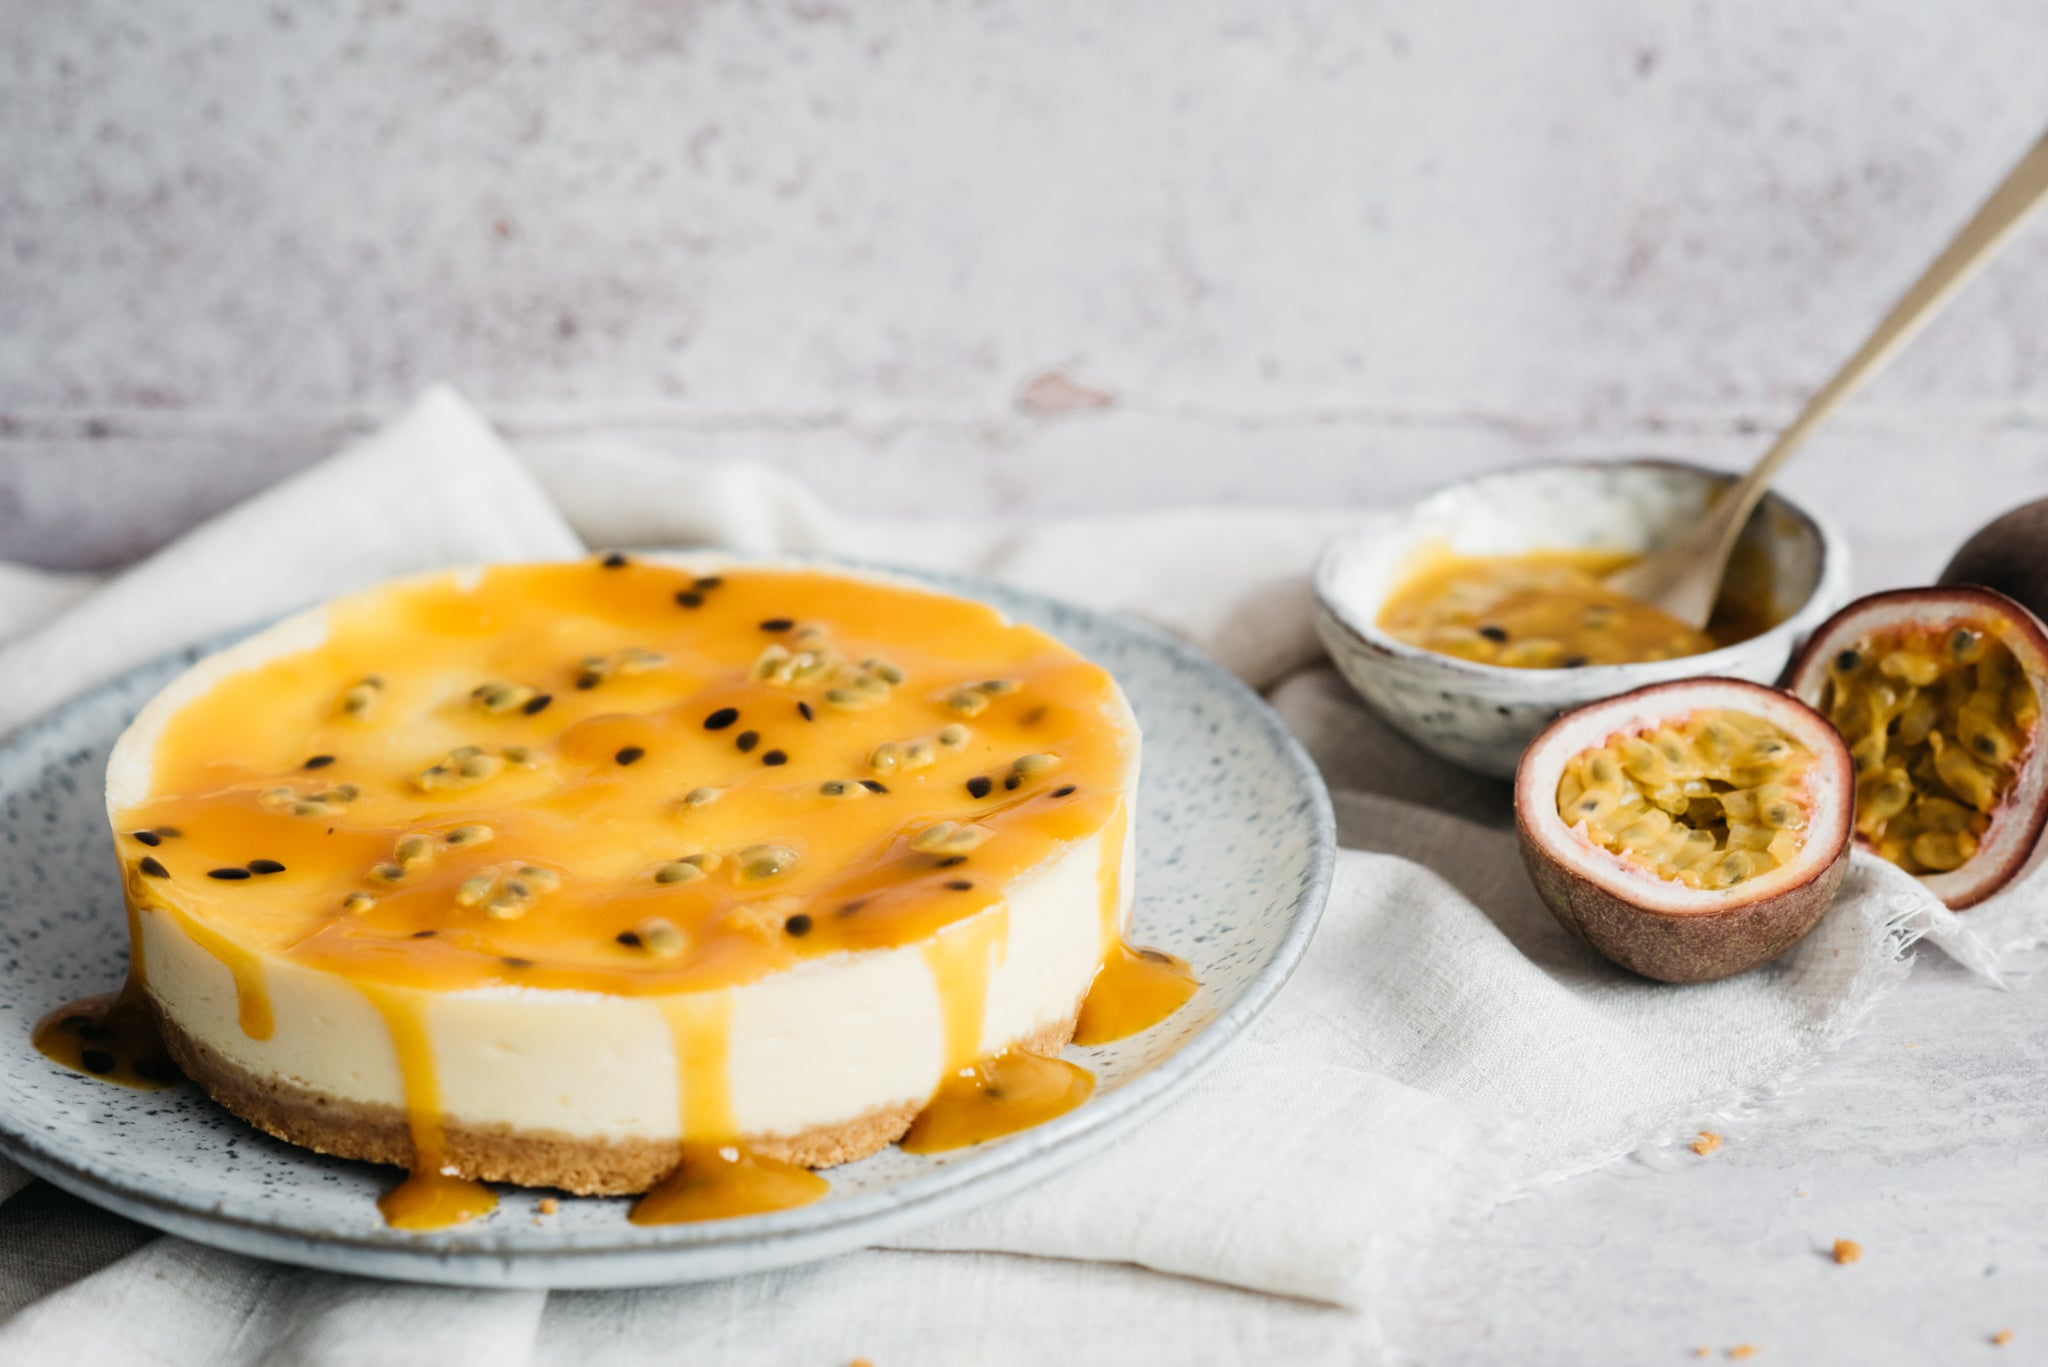 Cheesecake on a plate with passion fruit topping drizzled. Bowl of passionfruit sauce and spoon in background with passion fruits